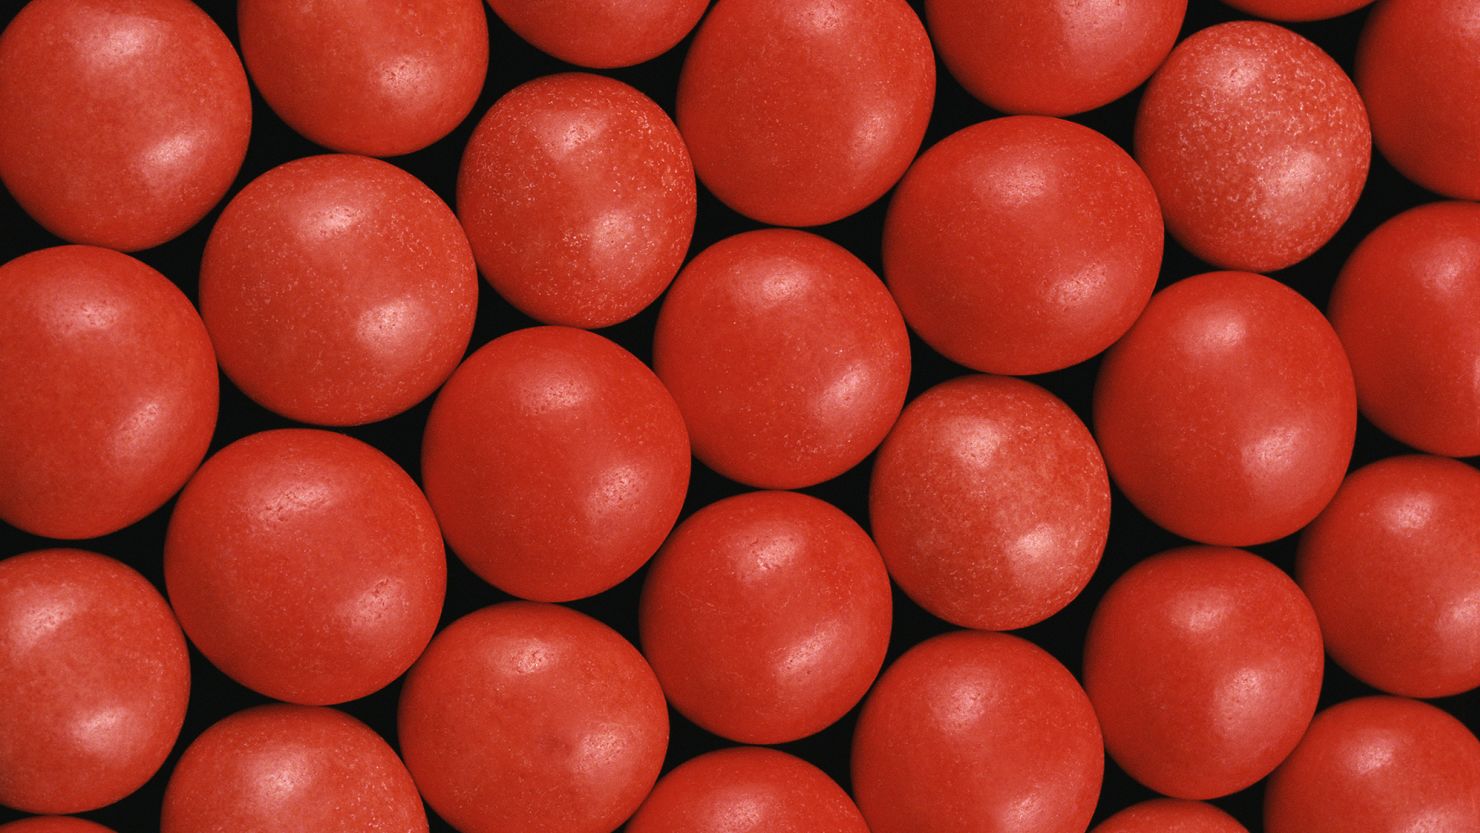 Red dye No. 3, an additive used in many popular candies, has been banned in California.